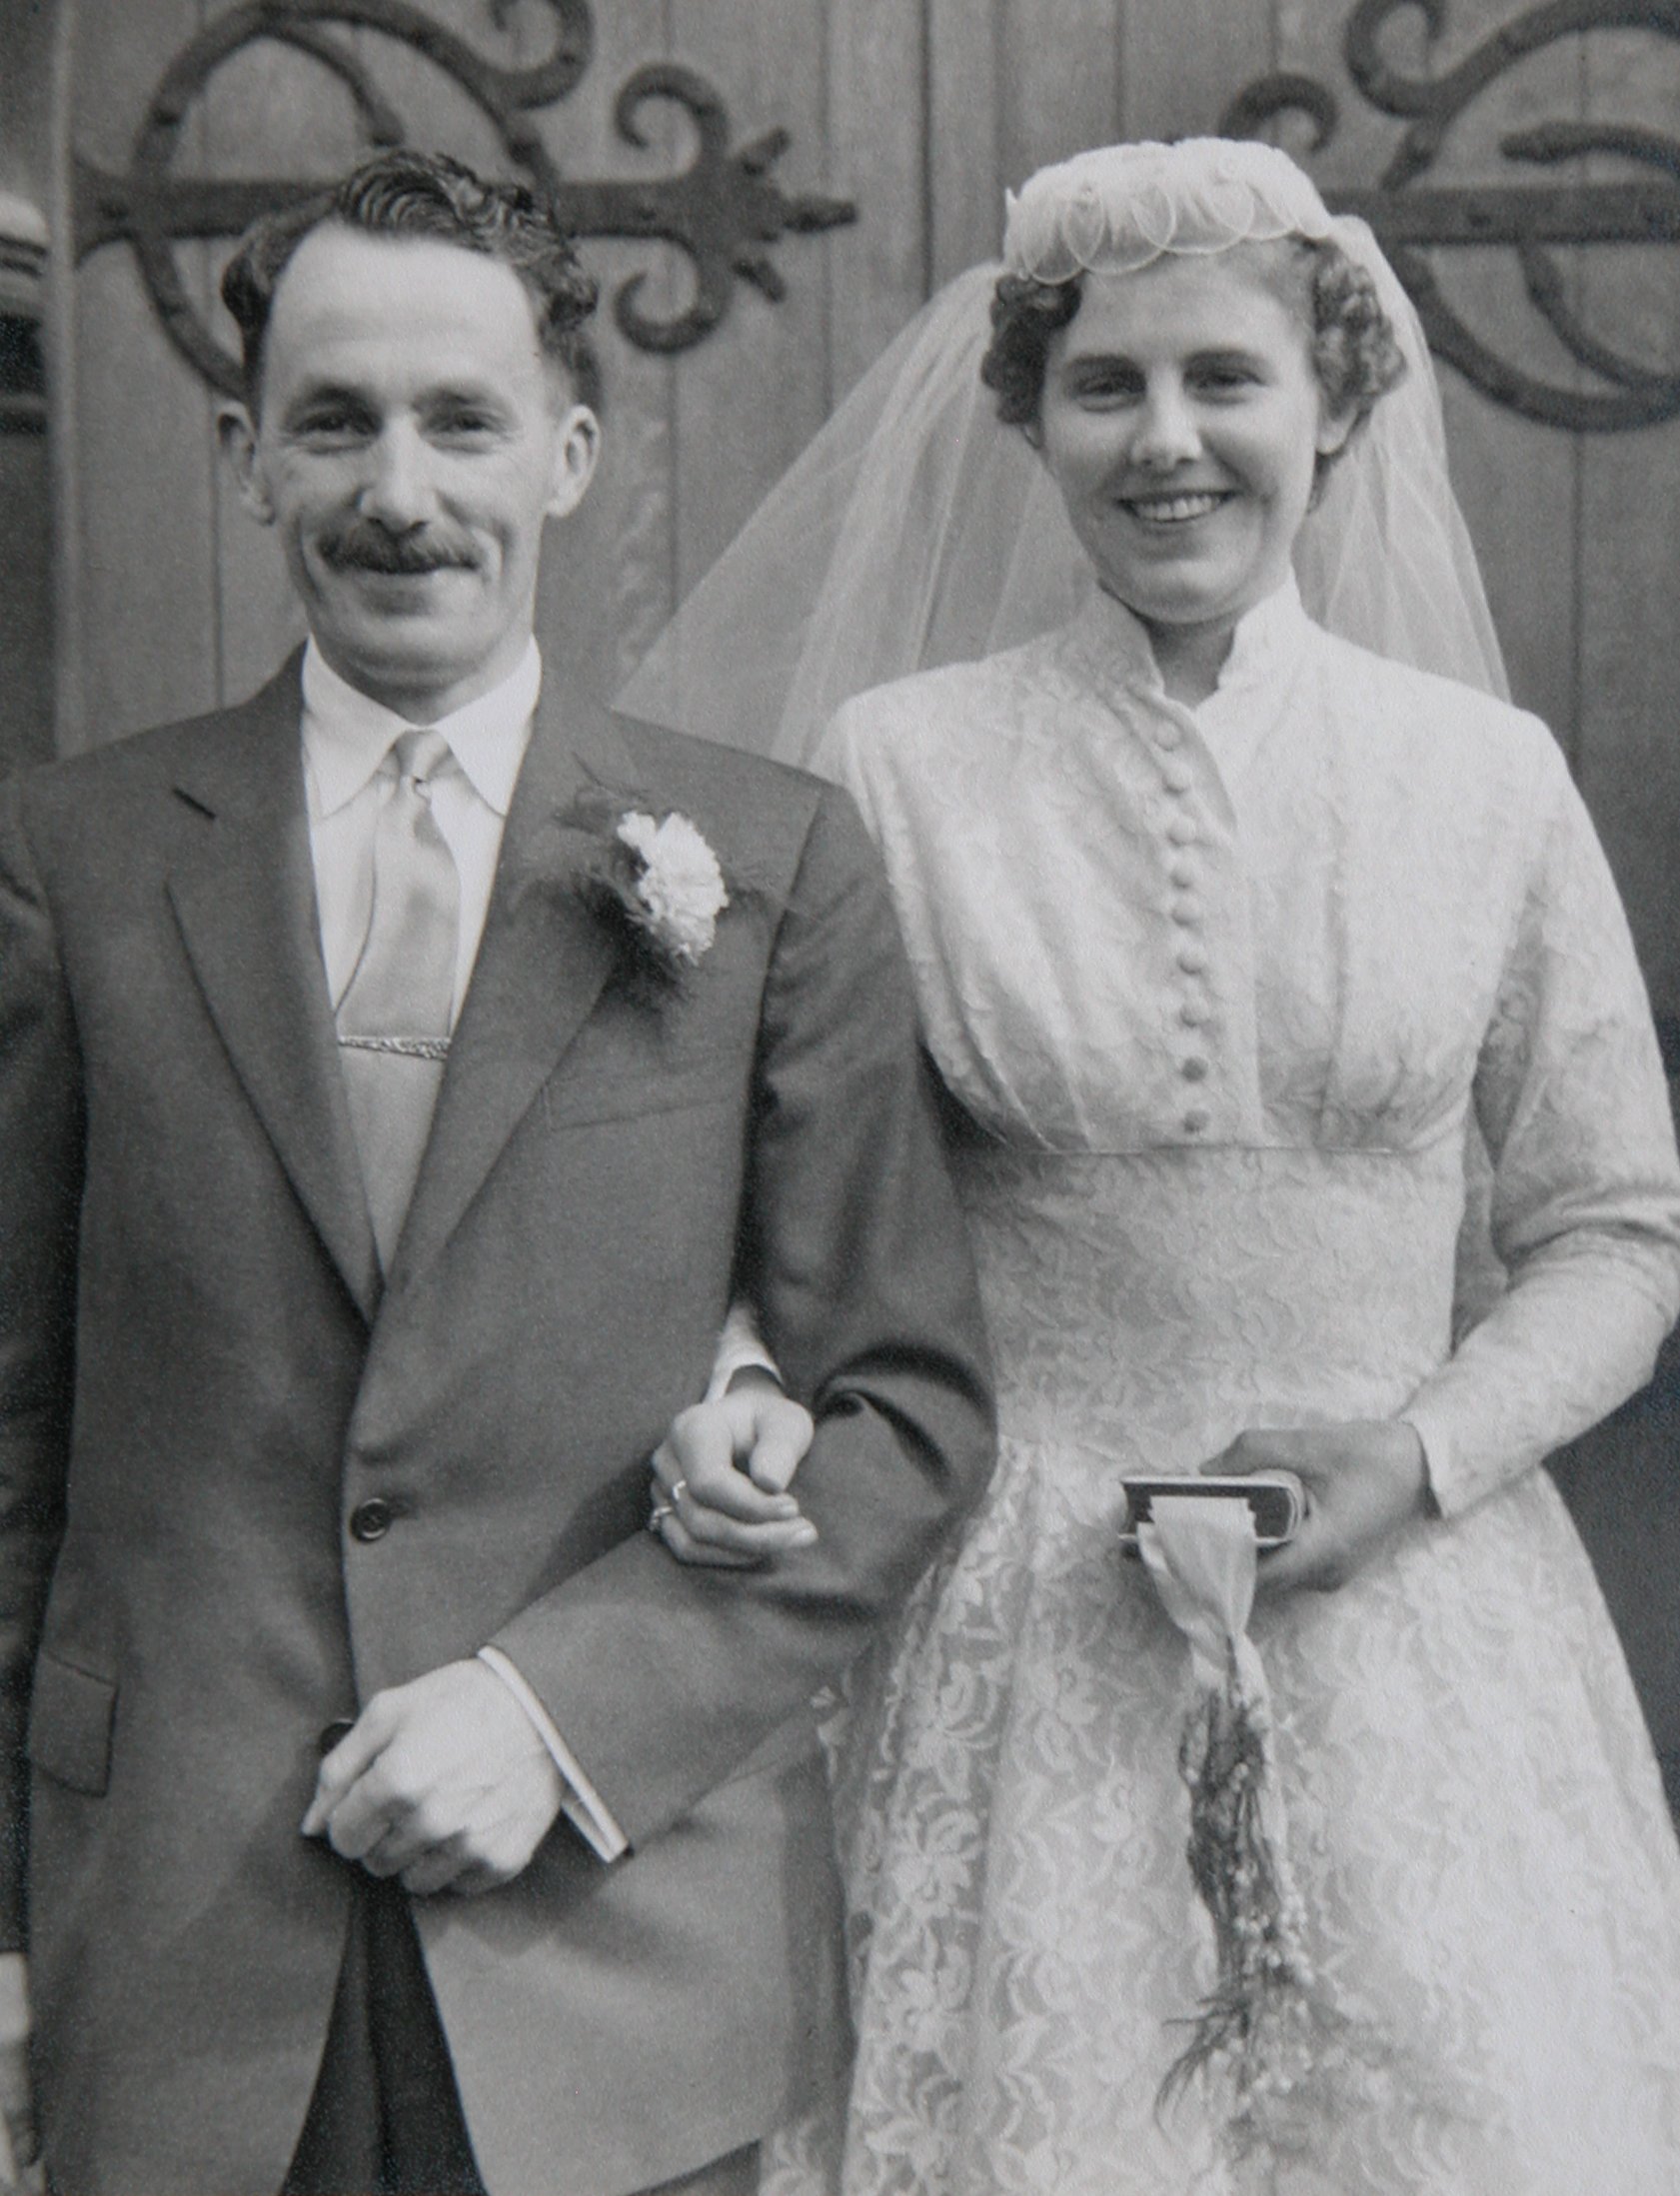 Truda and Bill wedding at St Peter's, Rooath, Cardiff - 13th March 1959